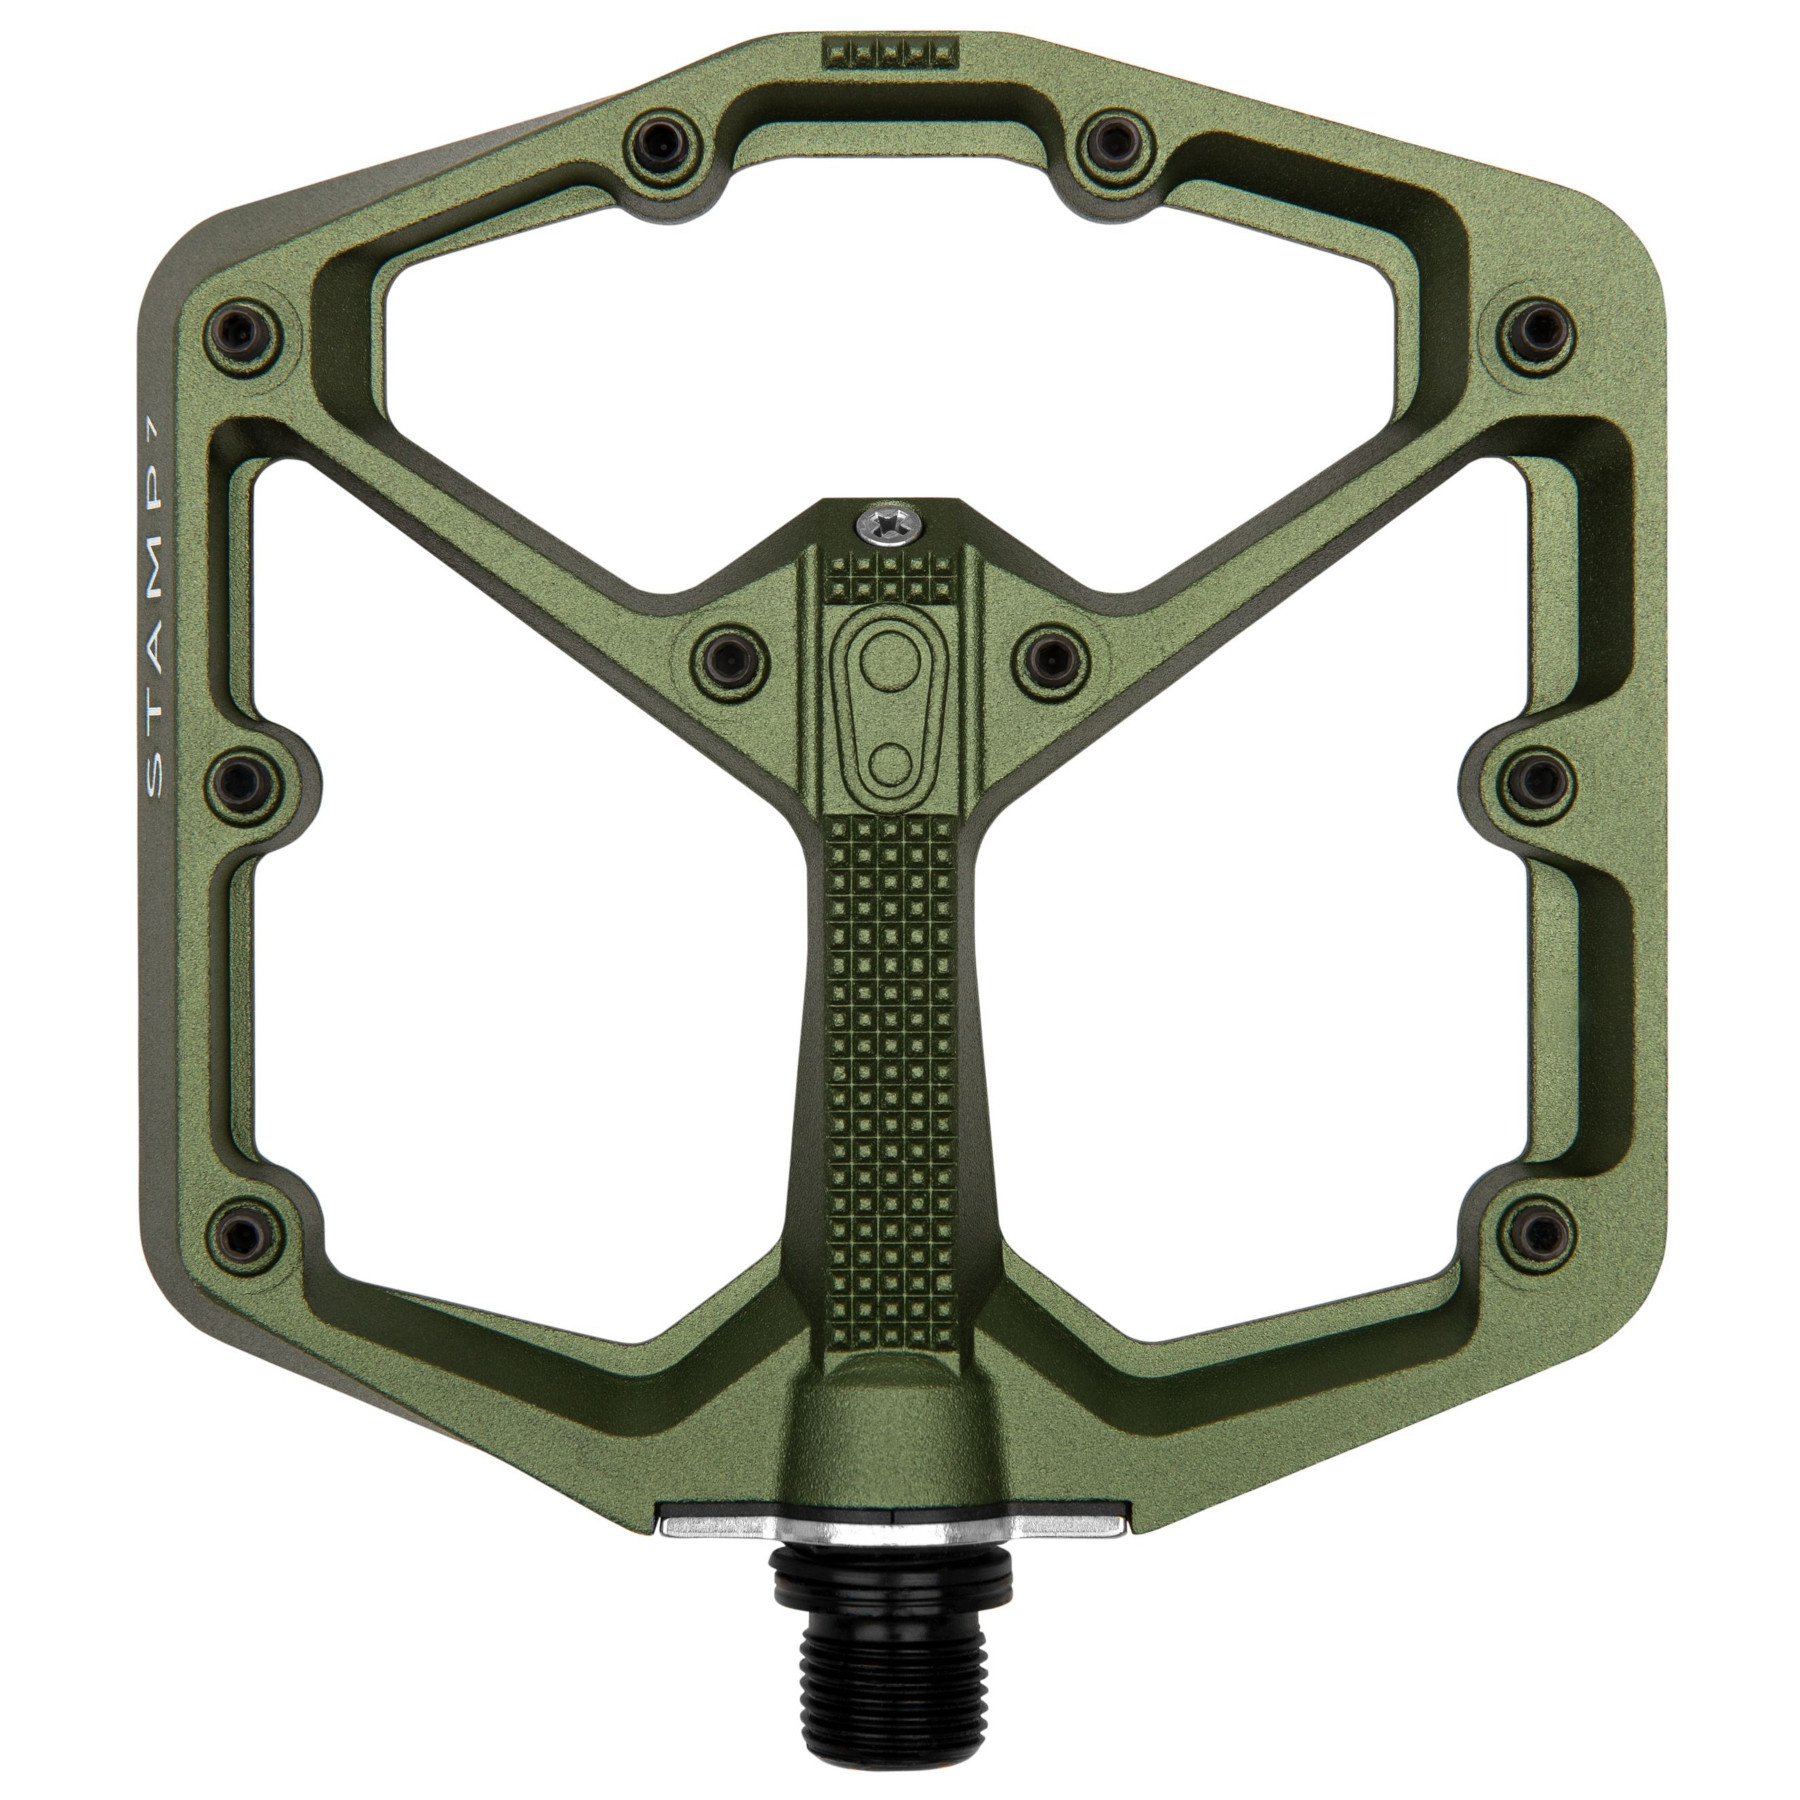 Picture of Crankbrothers Stamp 7 Large Flat Pedals - Camo Limited Collection - camo green